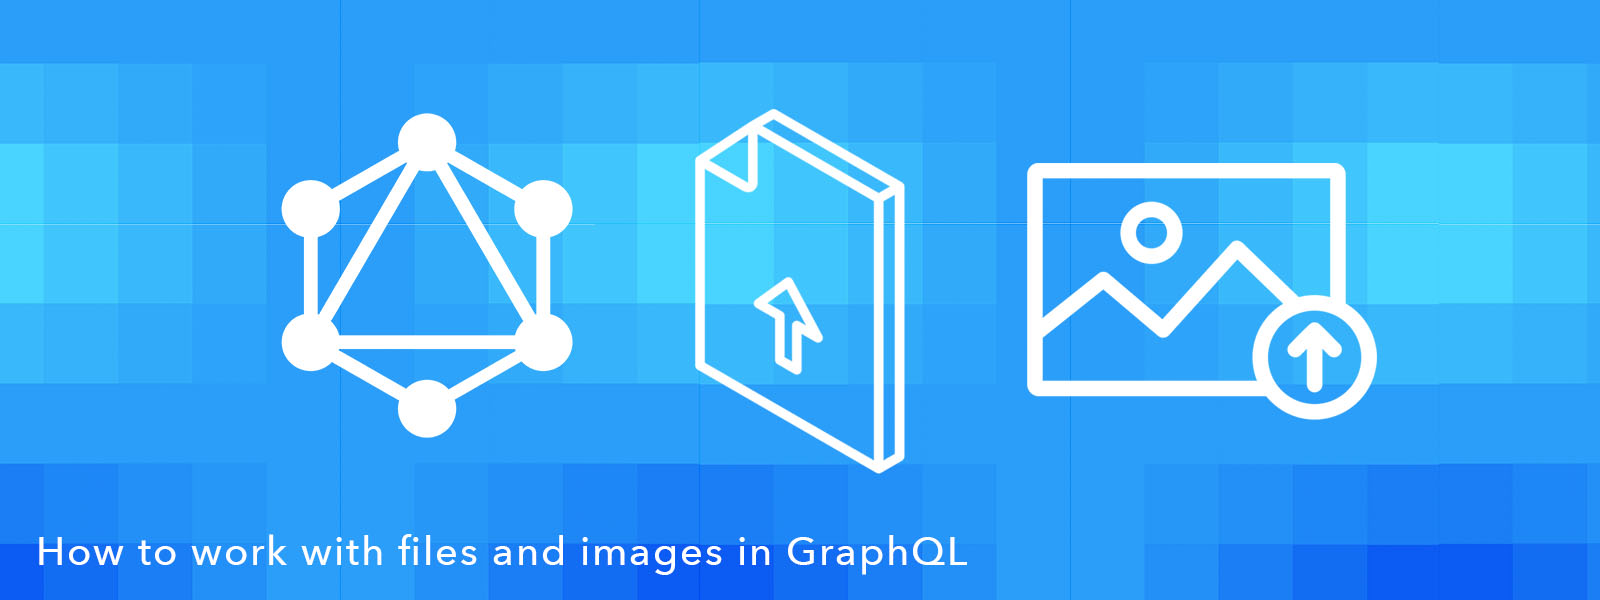 How to upload files and images with GraphQL